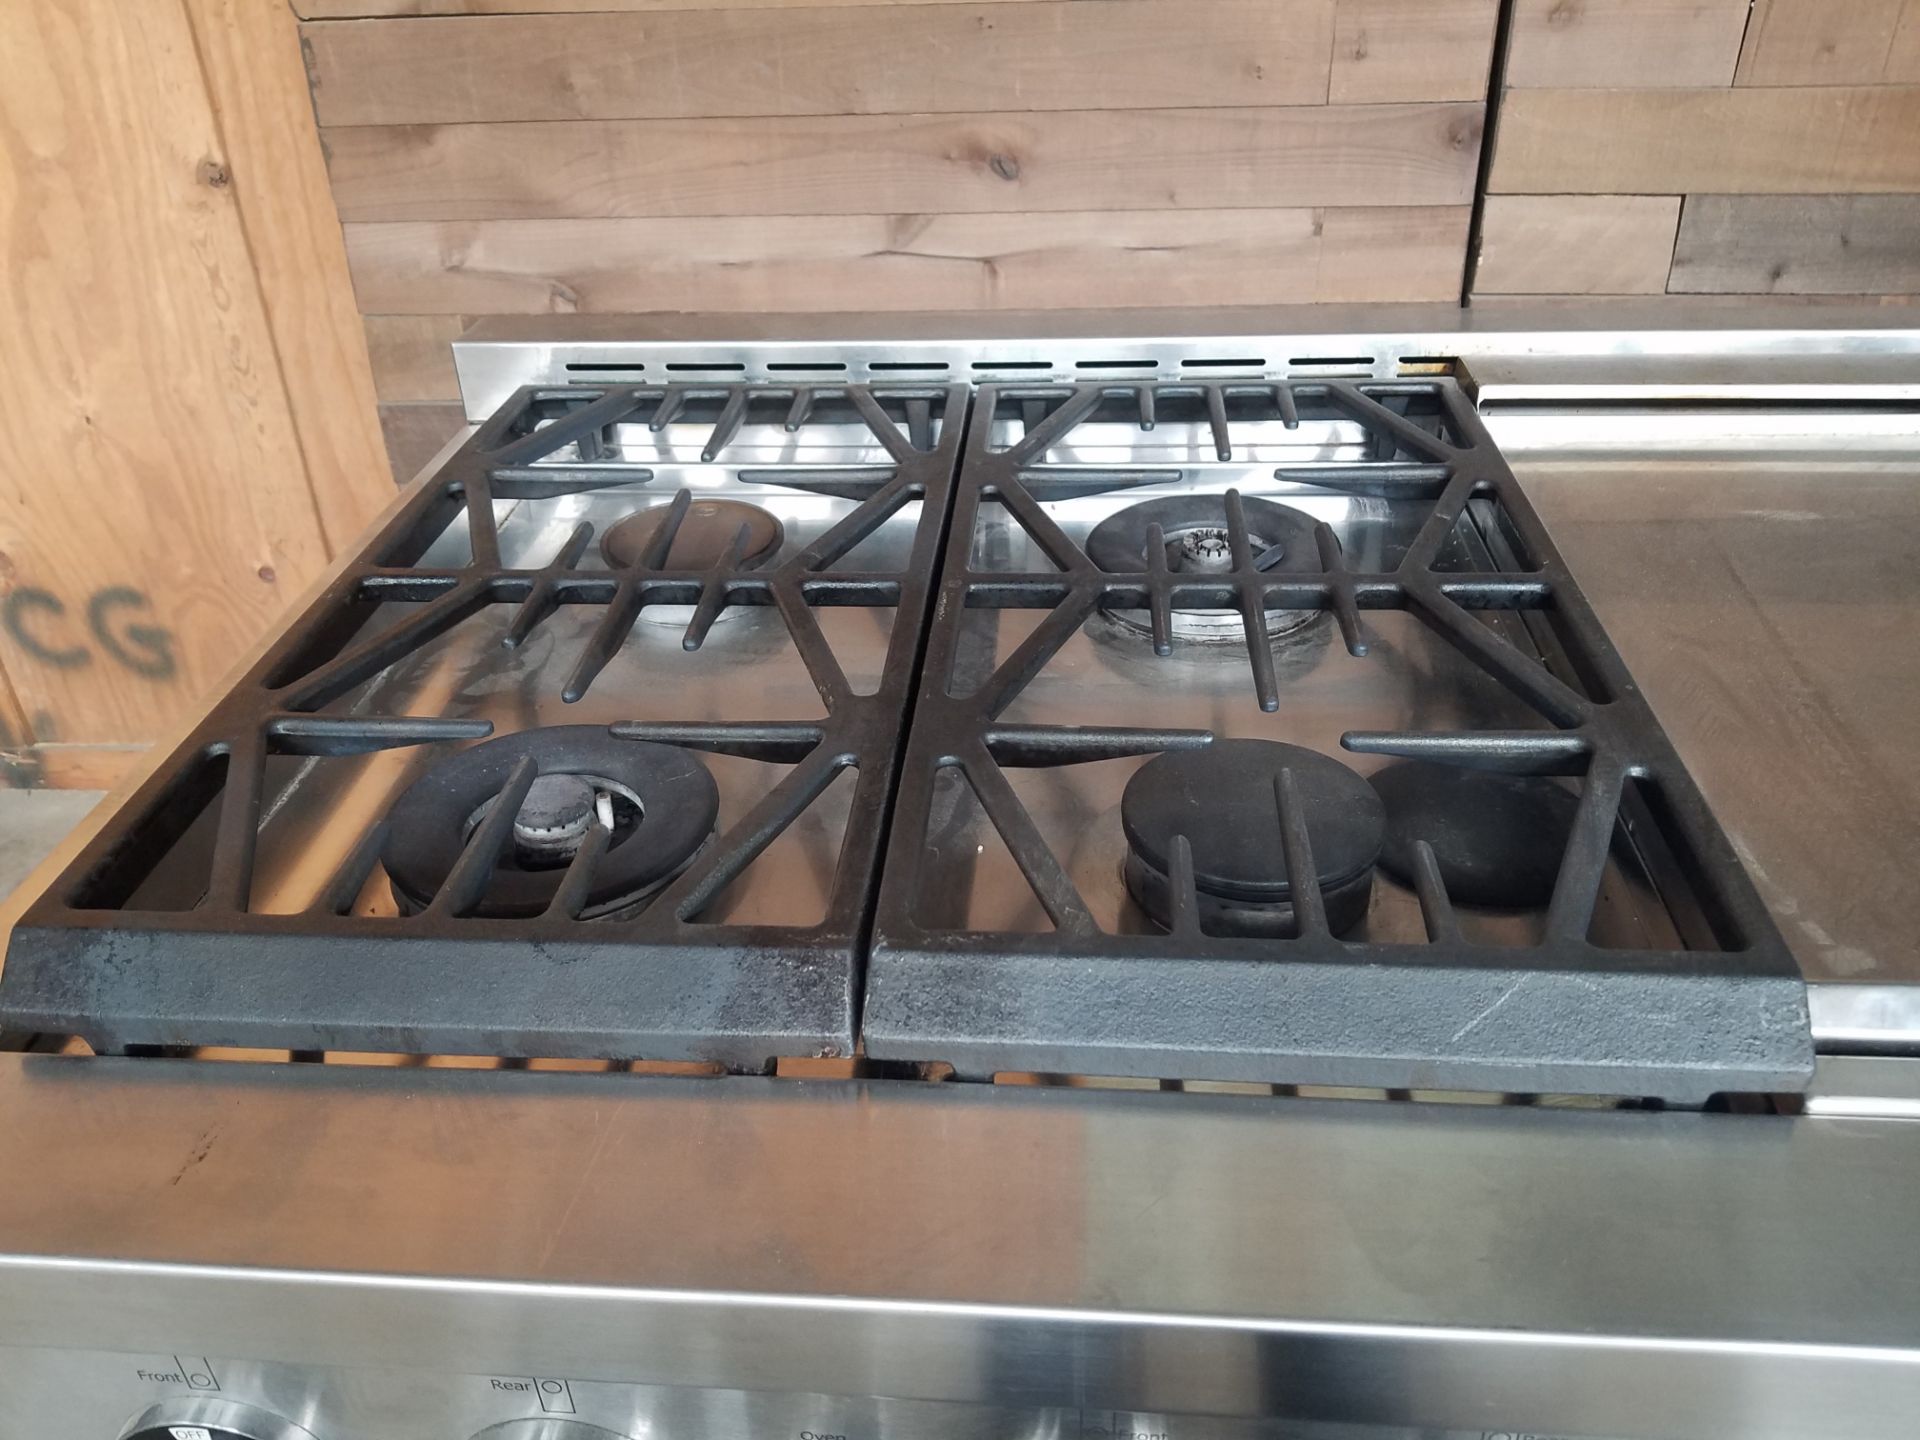 Jenn-Air Maytag PRG4810 Gas Oven, S/N 10000156PC with Griddle, Boiler and 6-Burner Stove - Image 3 of 5